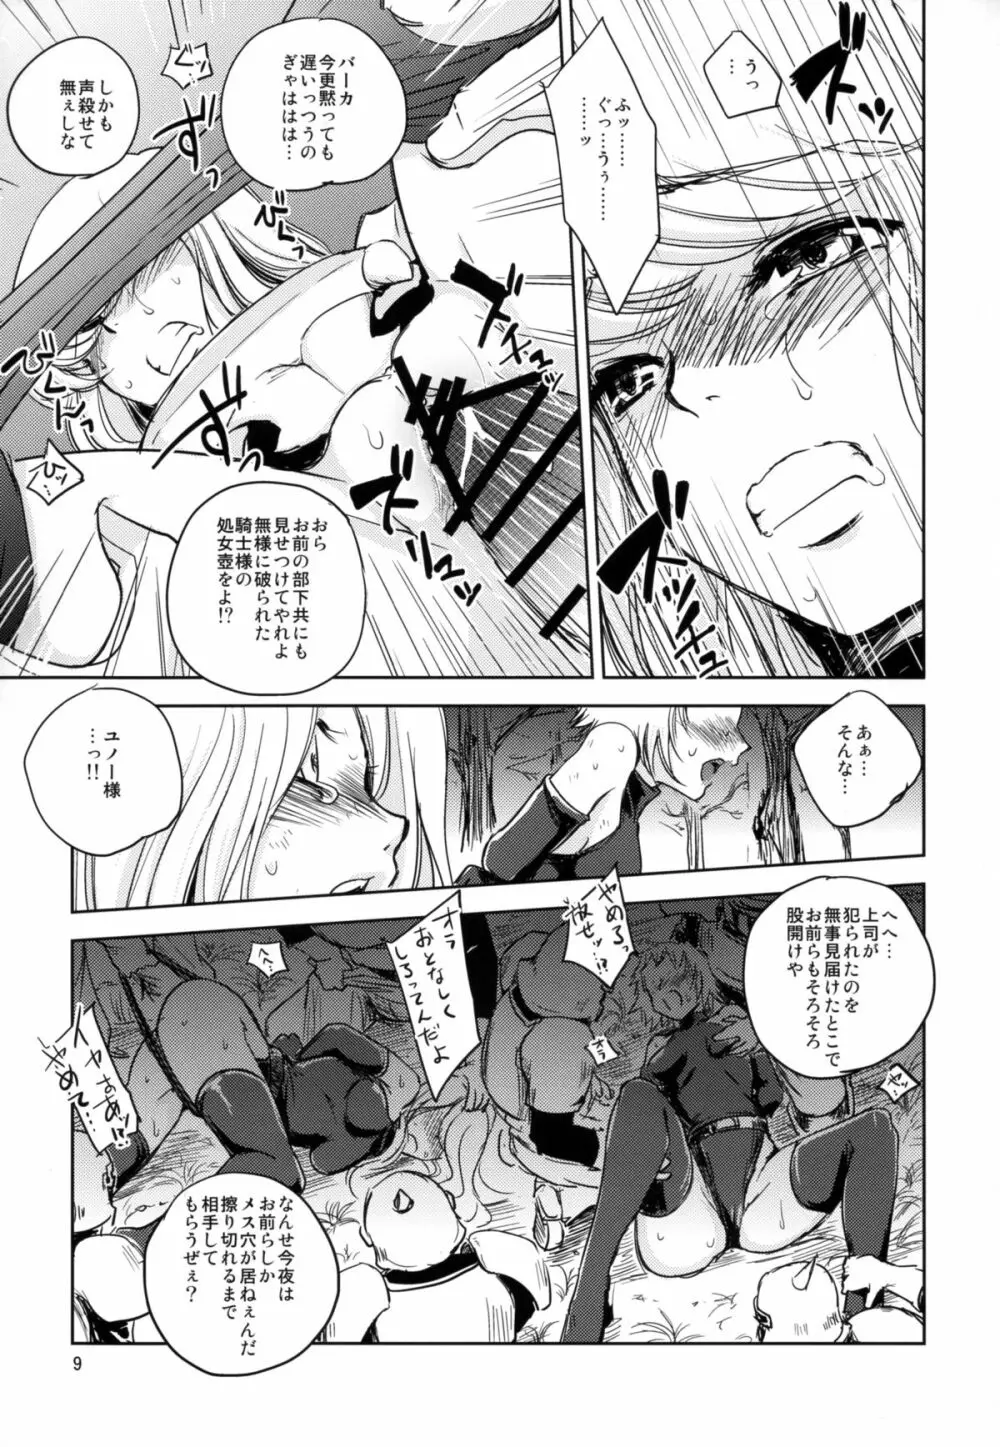 GRASSEN'S WAR ANOTHER STORY Ex #04 ノード侵攻 IV Page.9